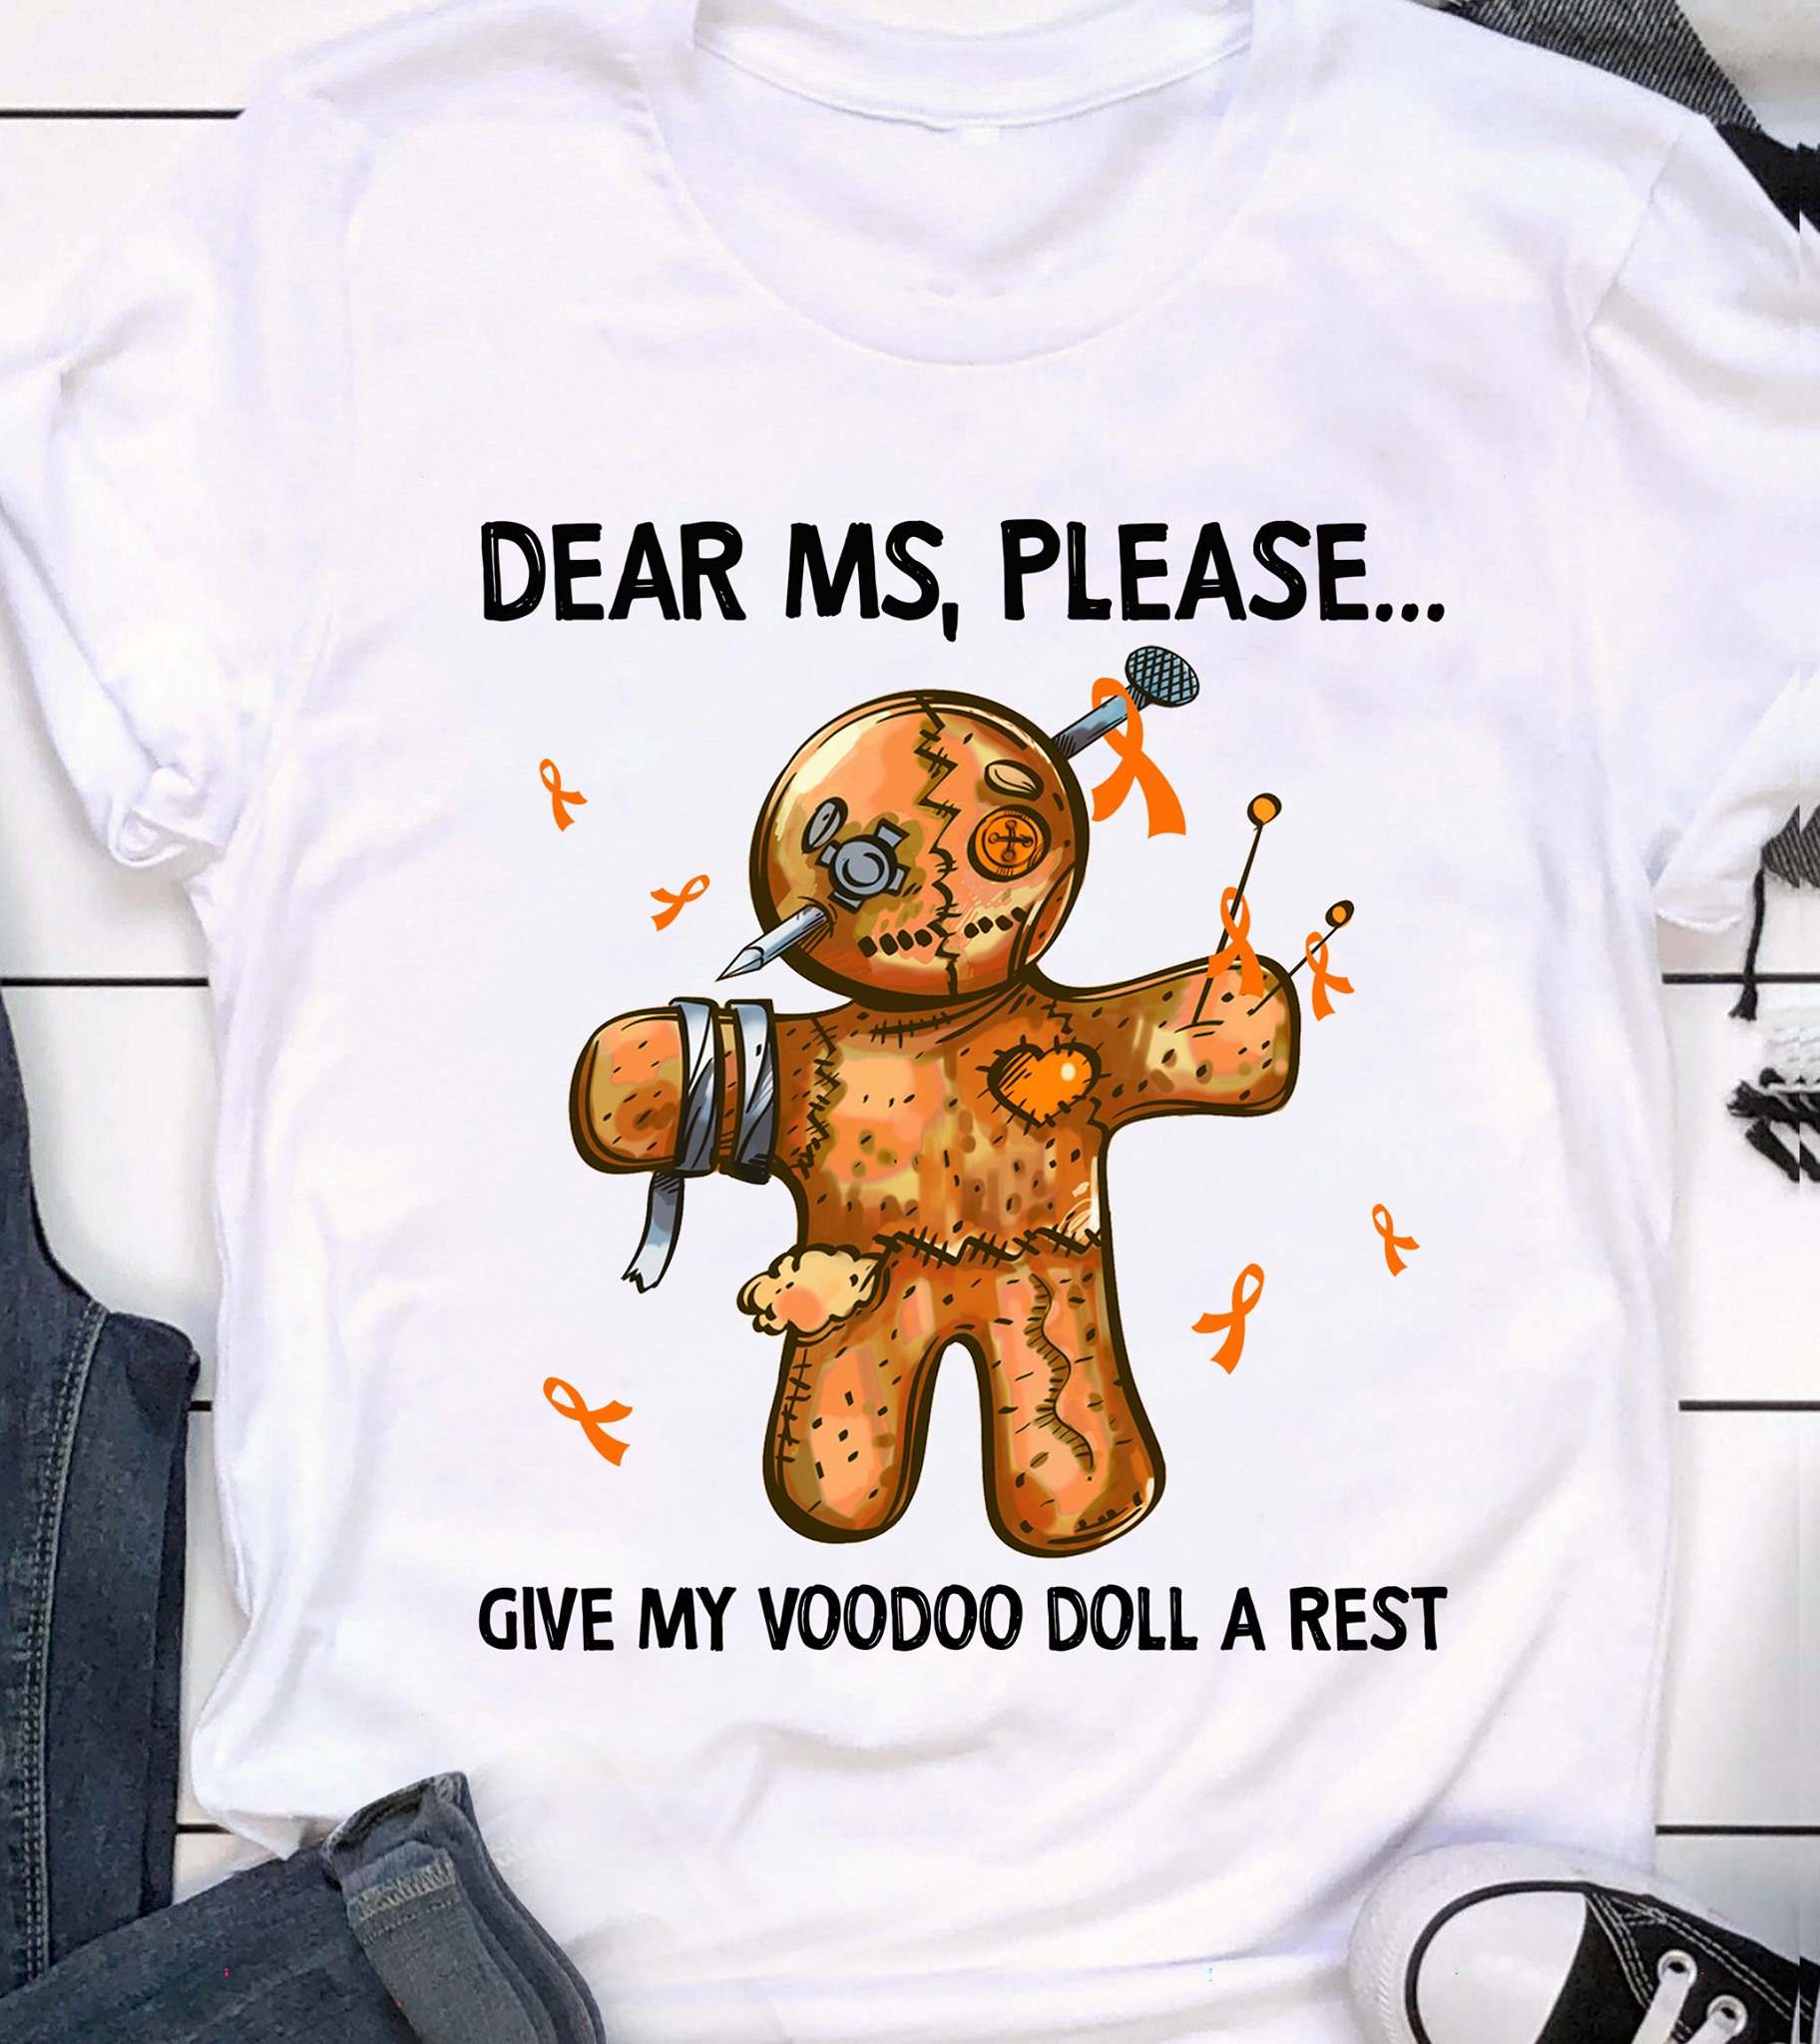 Voodoo Doll - Dear MS, please give my voodoo doll a rest